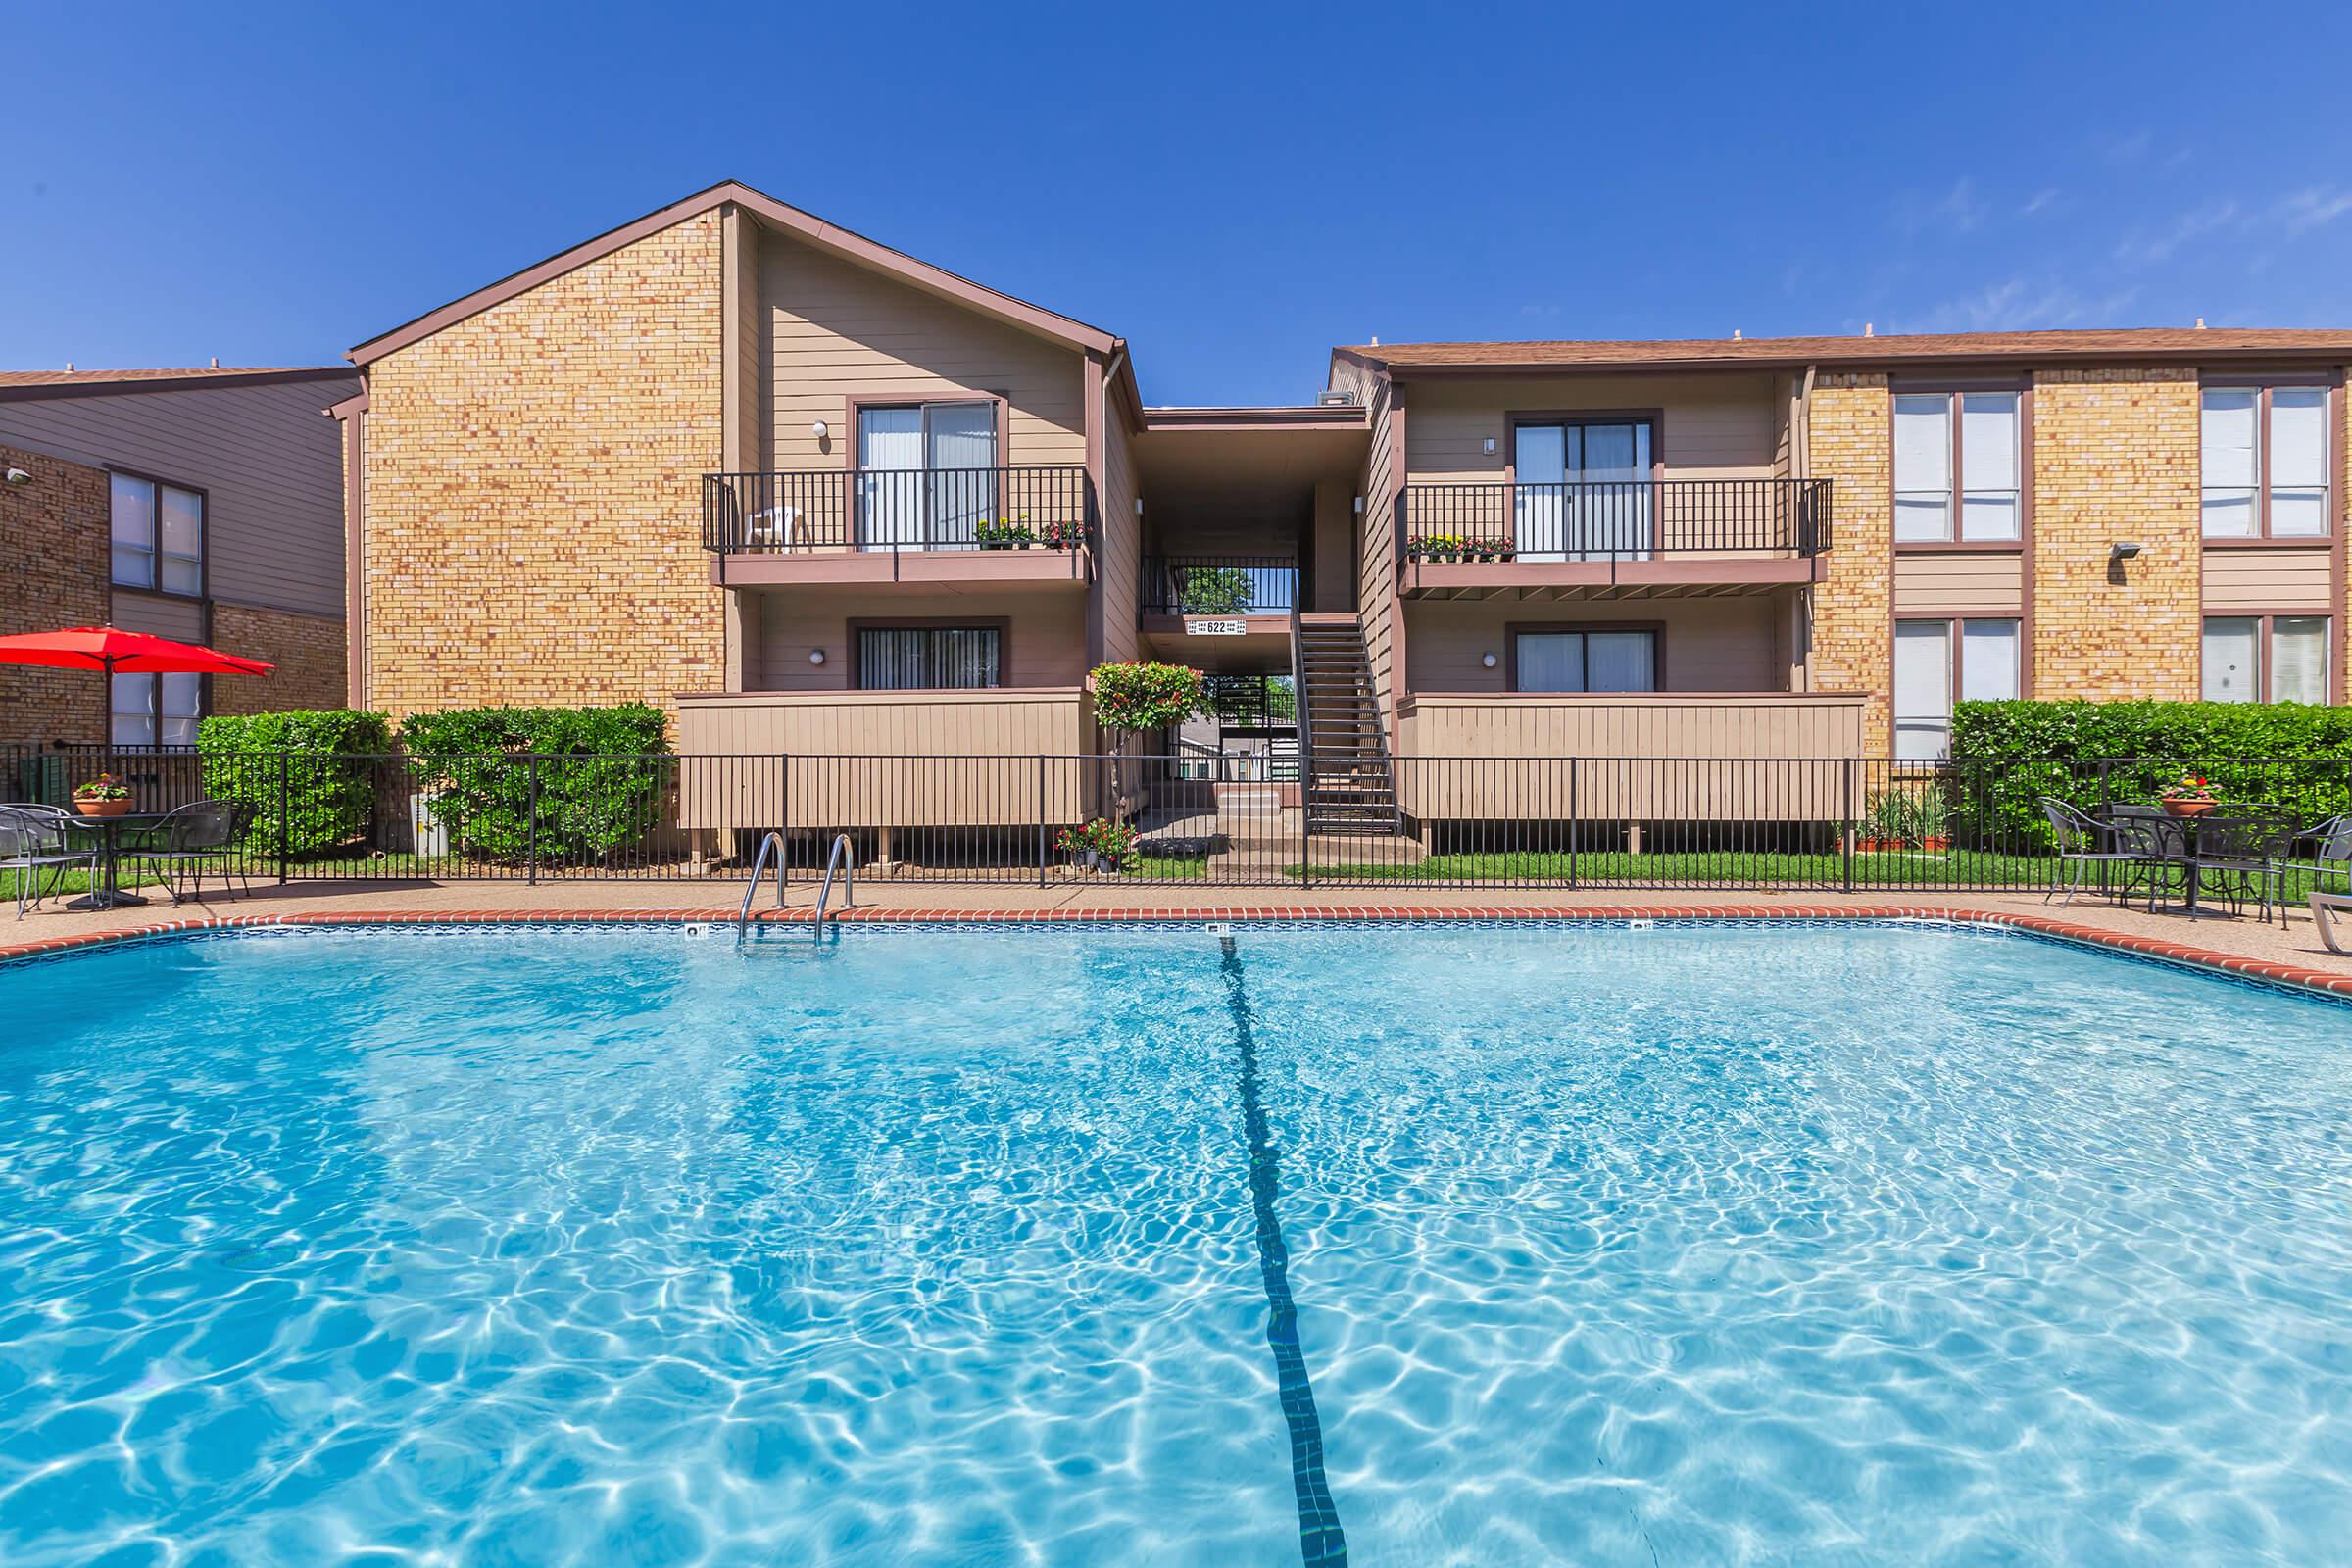 YOUR NEW HOME AWAITS YOU AT COUNTRY GREEN APARTMENTS IN DALLAS, TX